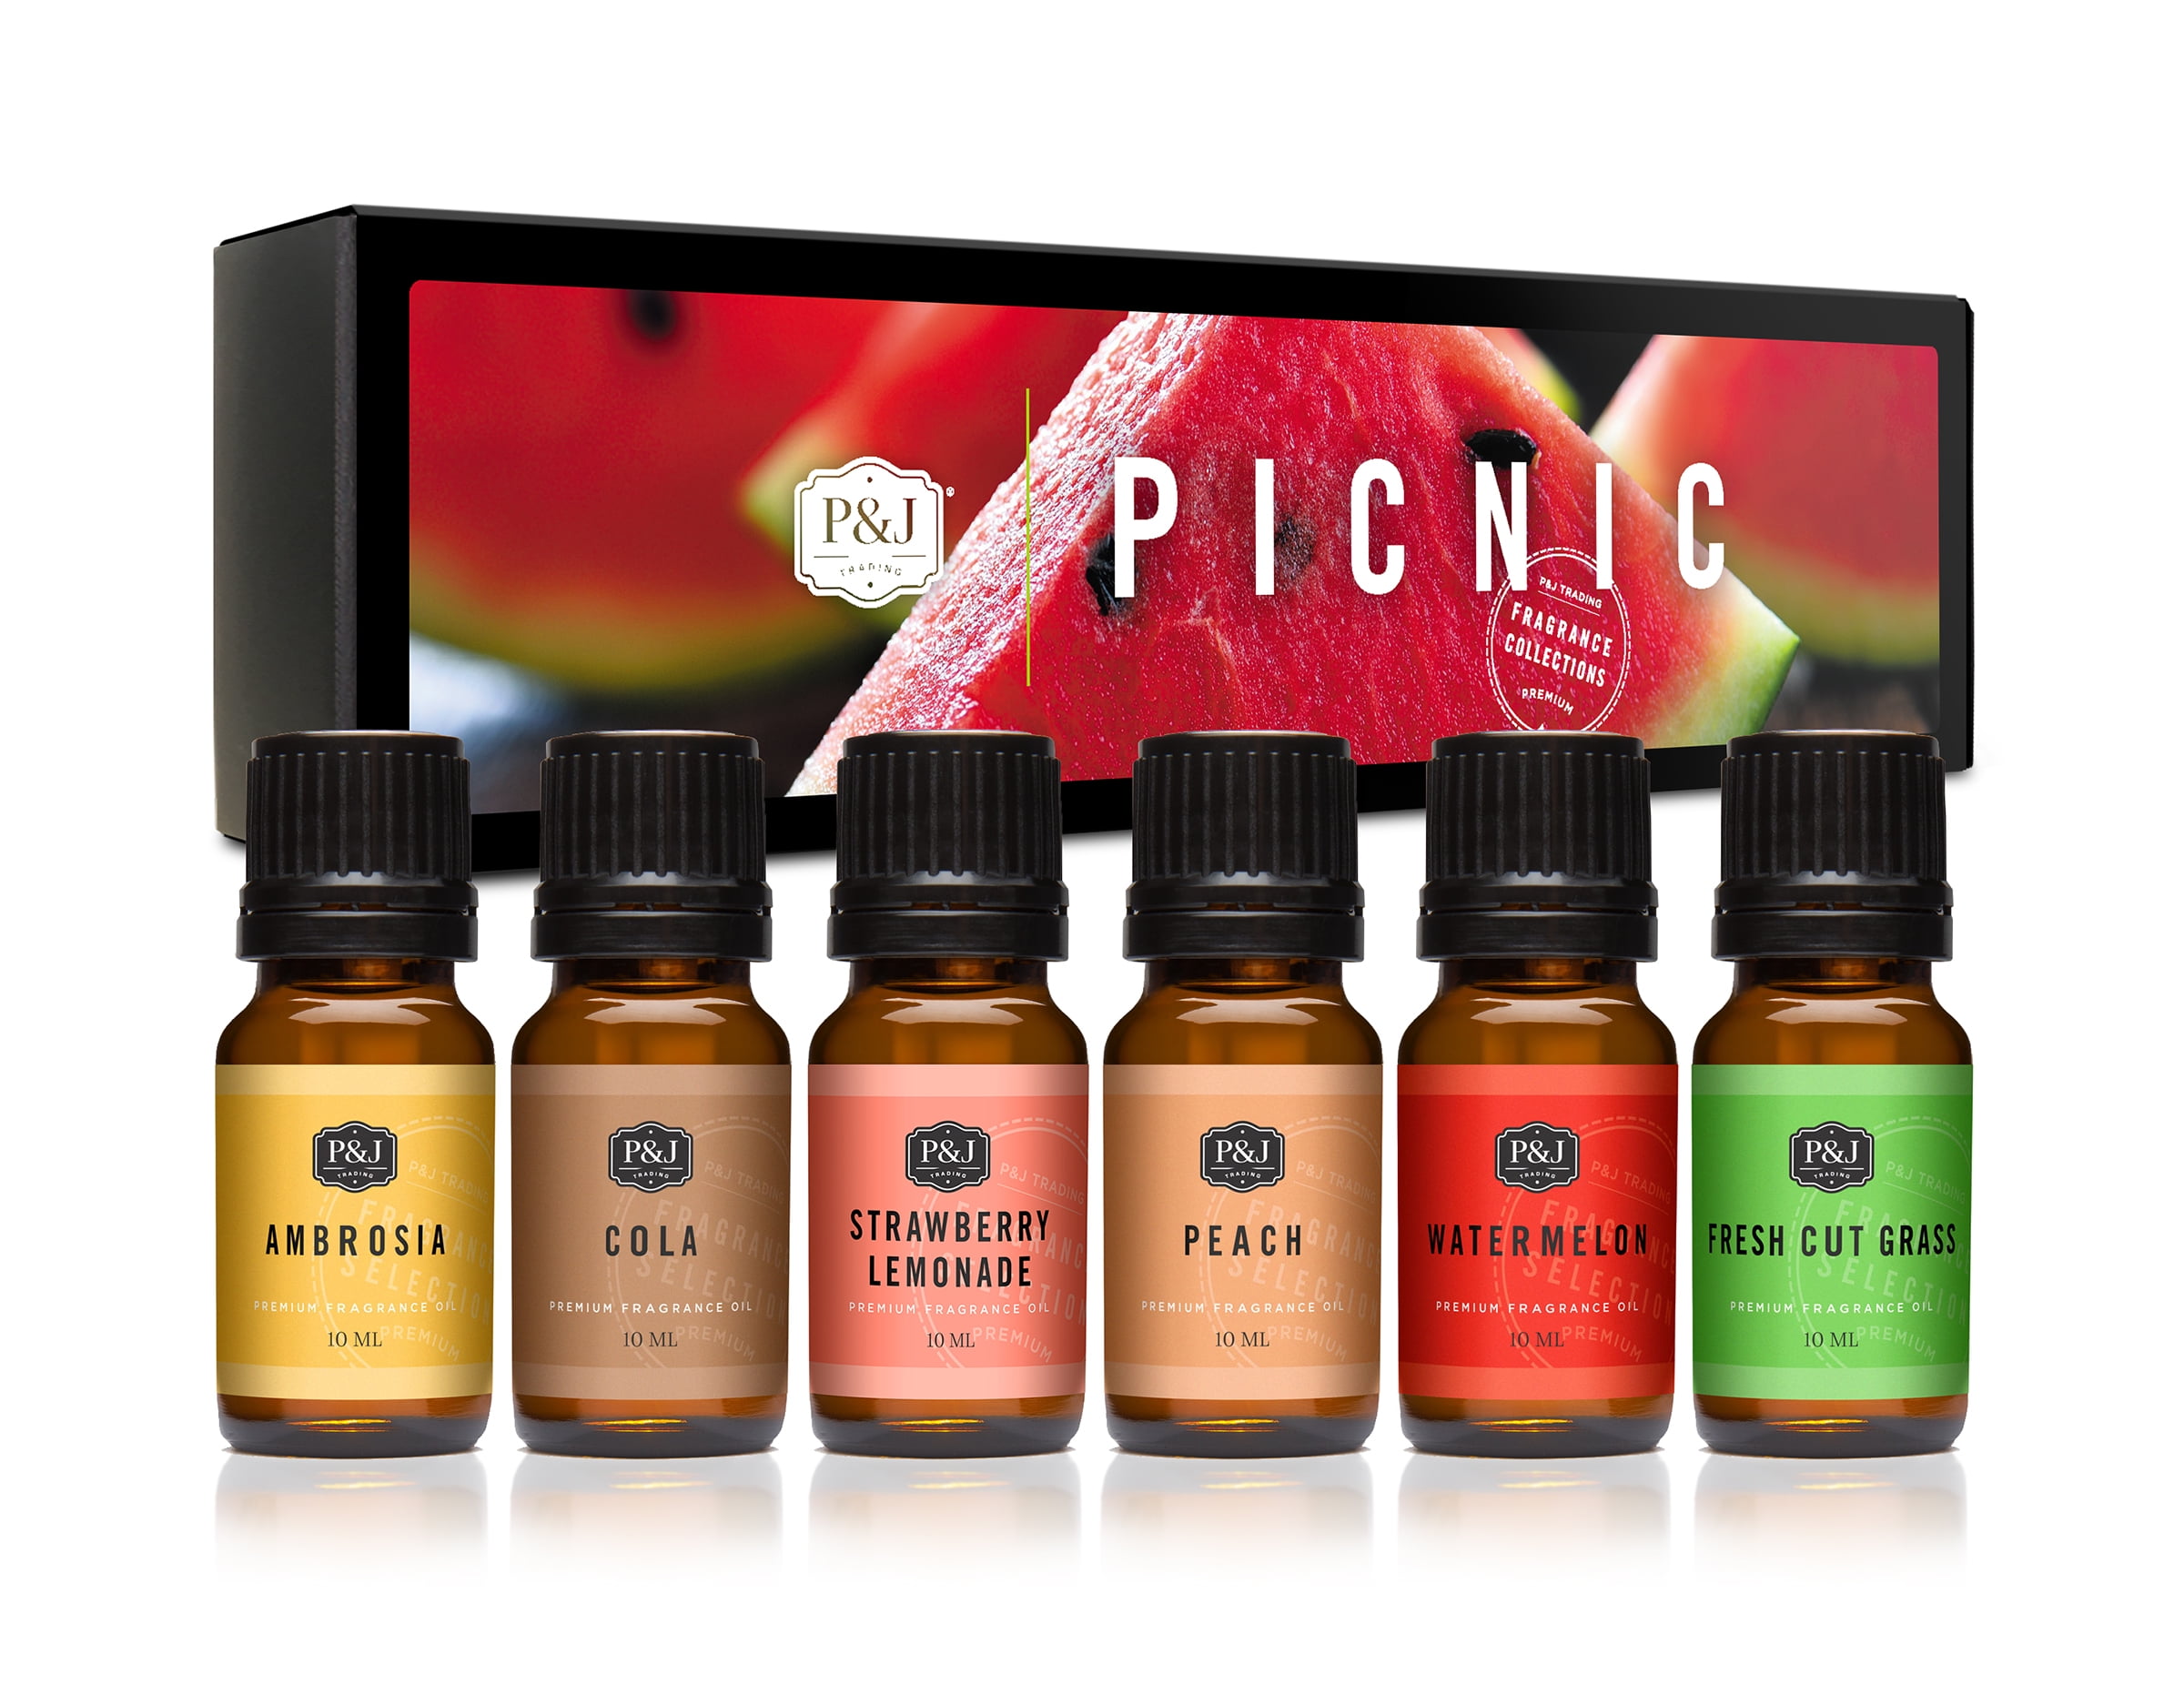 P&J Picnic Set of 6 Premium Fragrance Oil for Candle Making & Soap Making,  Lotions, Haircare, Diffuser Oils Scents 